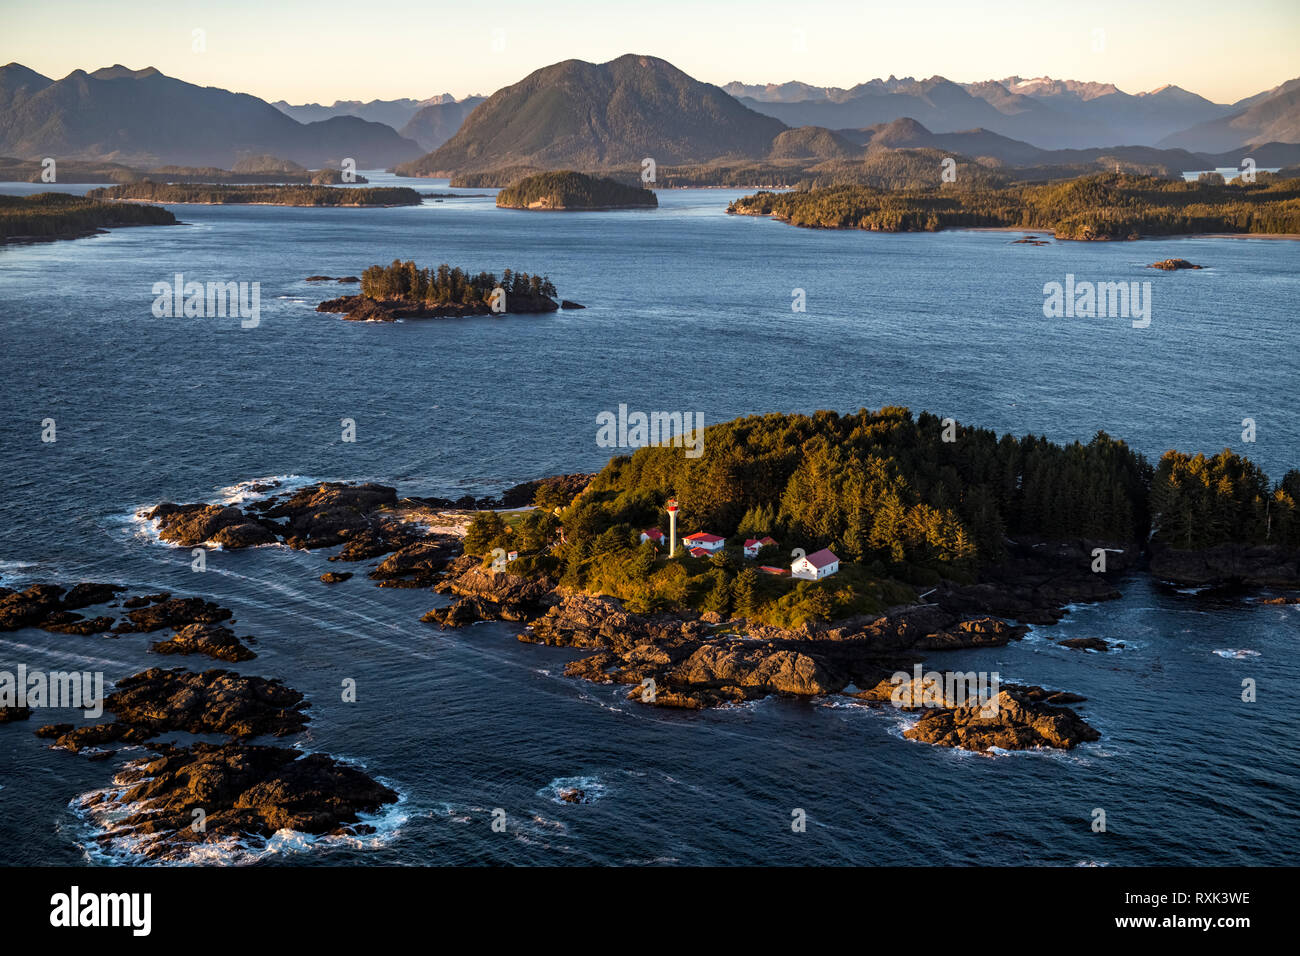 Aerial image of Lennard Island Lighthouse, Tofino and Clayoquot Sound, Vancouver Island, BC Canada Stock Photo